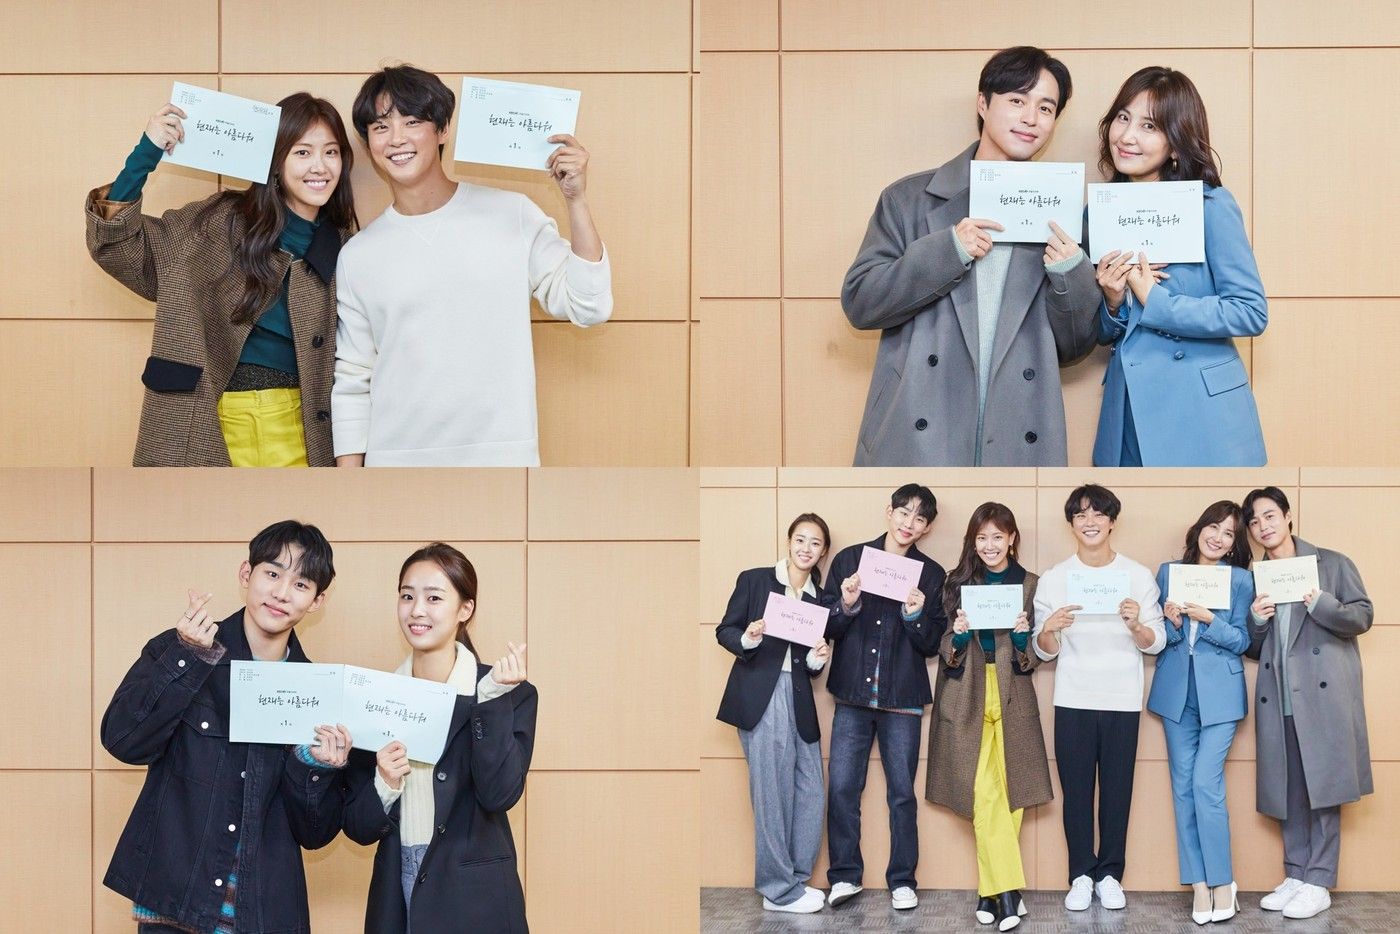 KBS Readies Next Weekend Family Drama with It’s Beautiful Now Starring Yoon Shi Yoon, Oh Min Suk, and Seo Bum June as Three Brothers Looking for Love